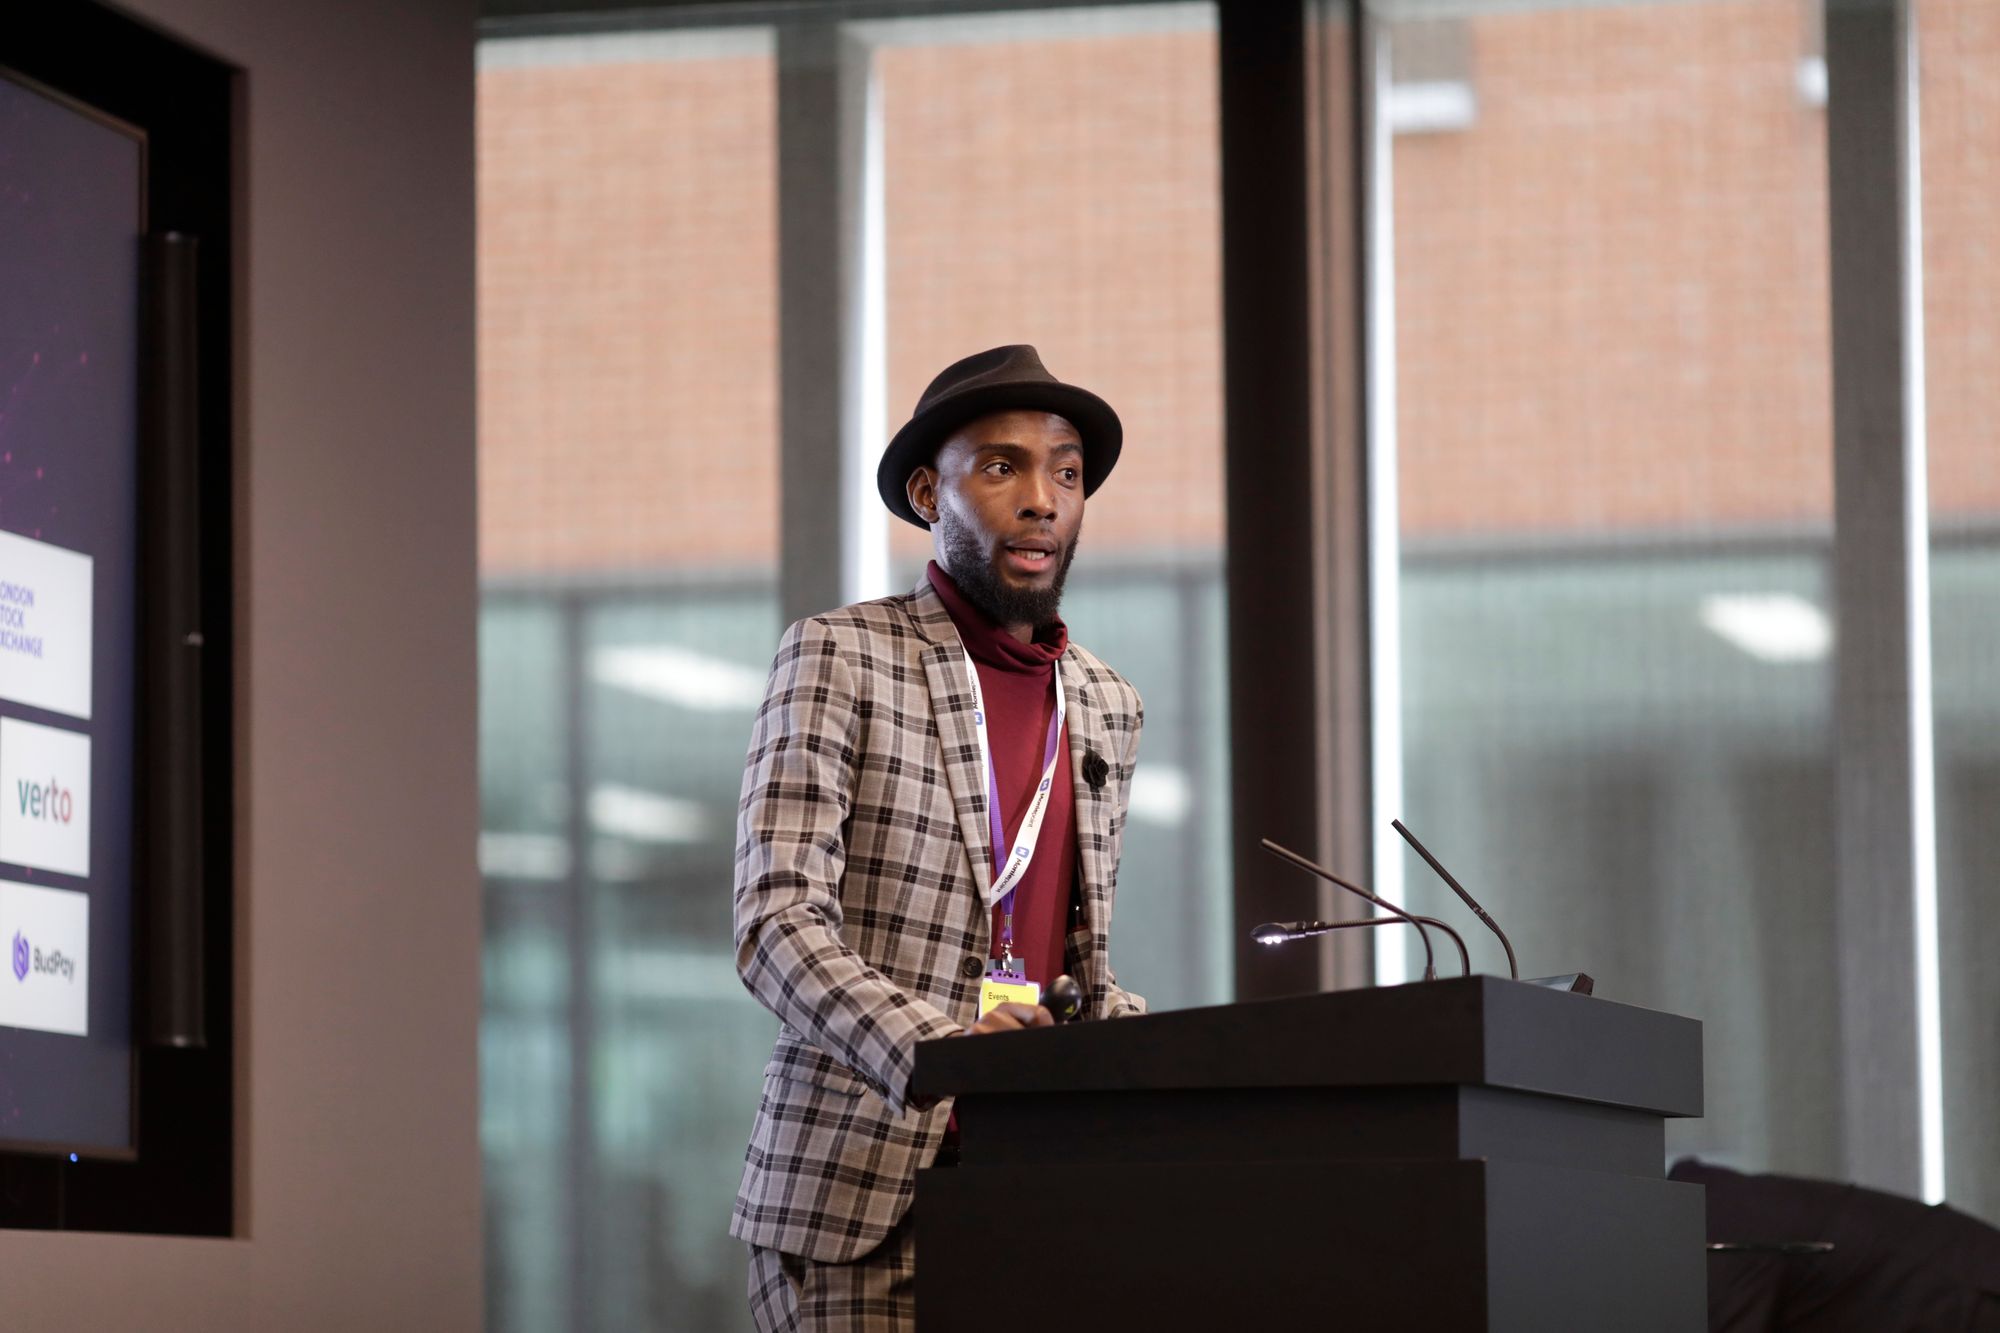 Safiri Takes Center Stage: Pitching at Africa Tech Summit London 2023